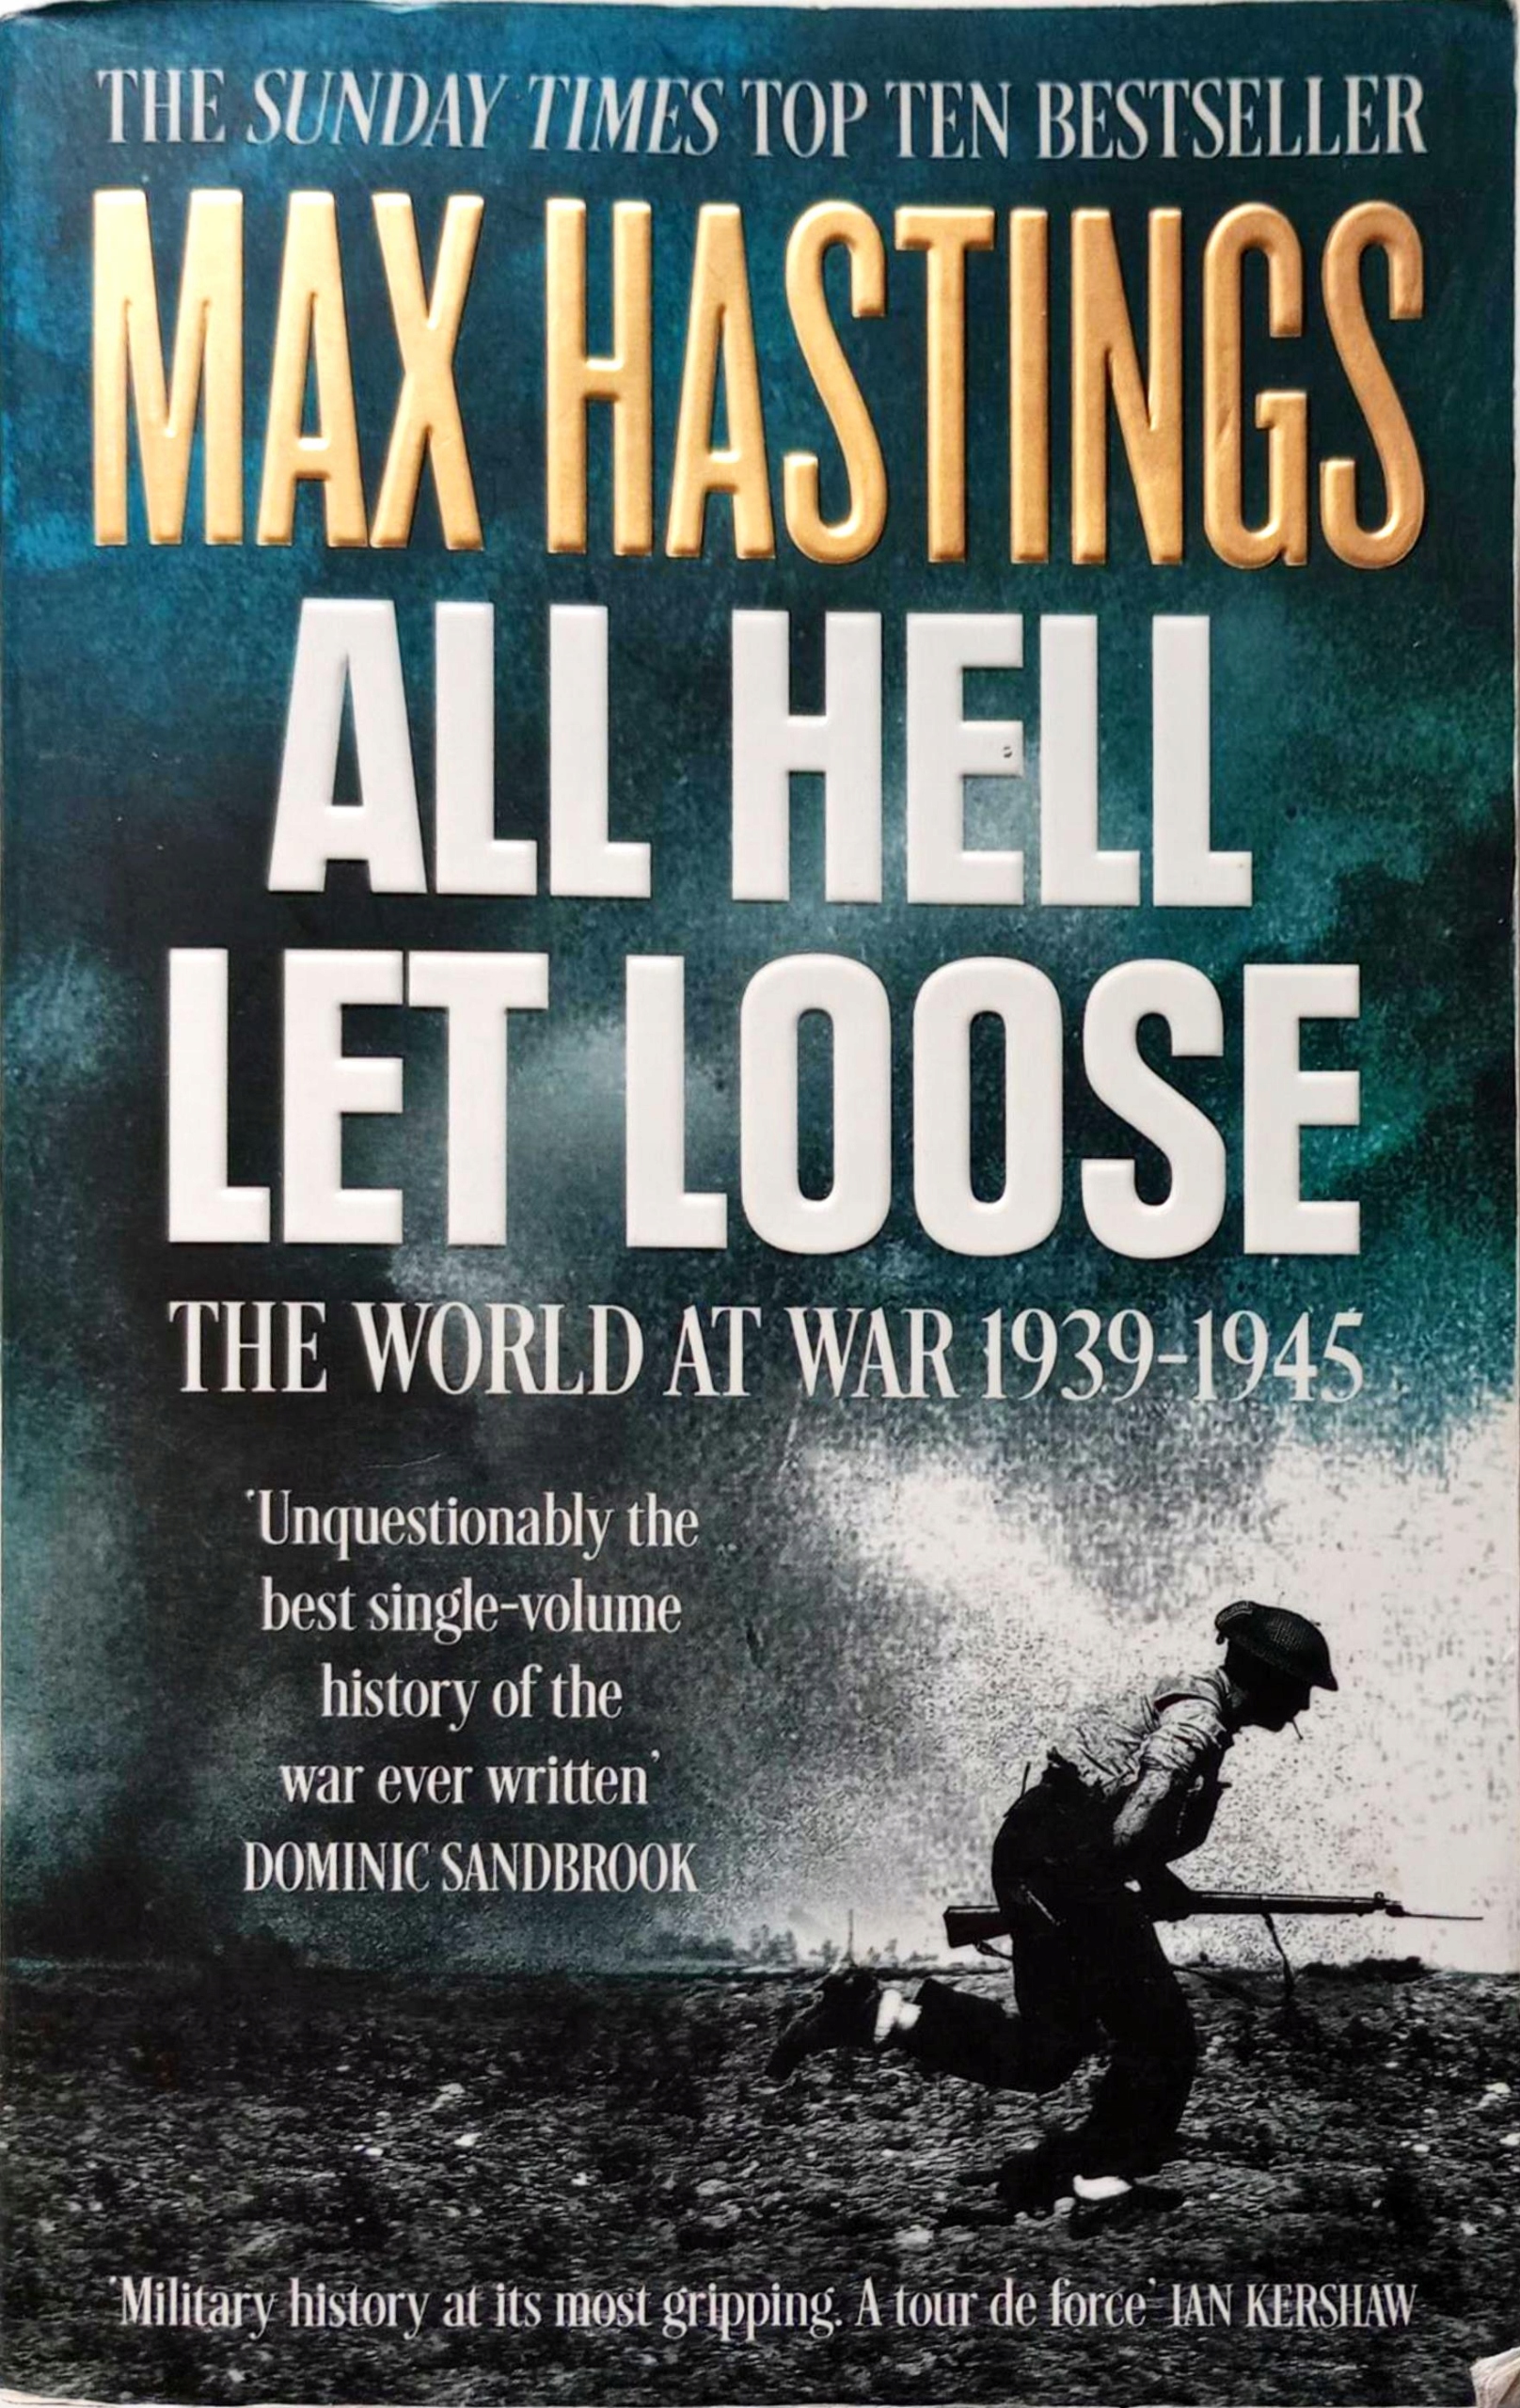 MAX HASTINGS - ALL HELL LET LOOSE: THE WORLD AT WAR